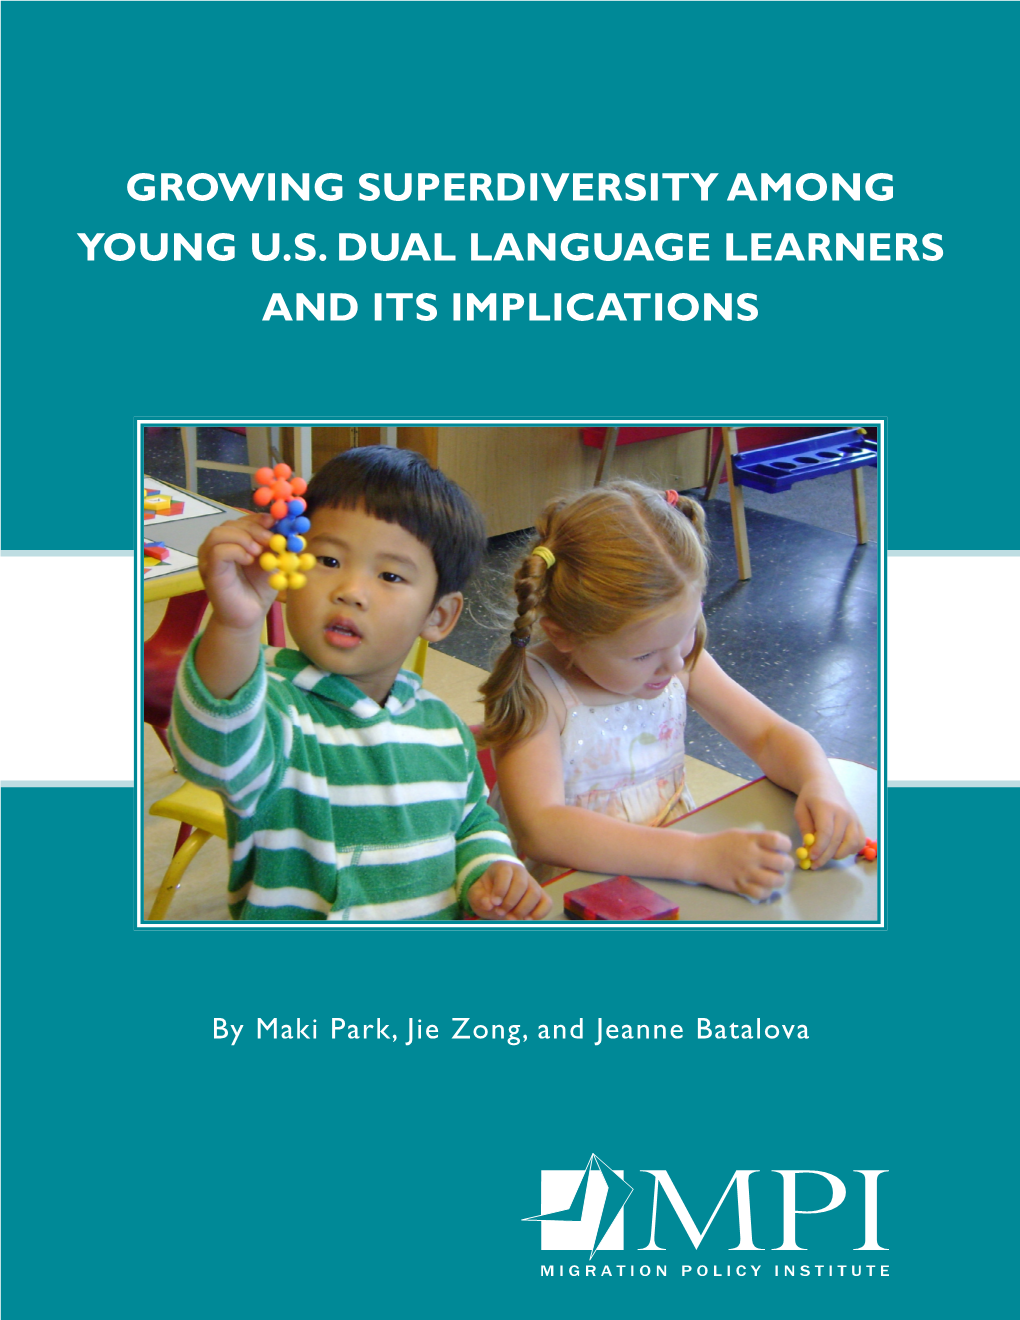 Growing Superdiversity Among Young U.S. Dual Language Learners and Its Implications